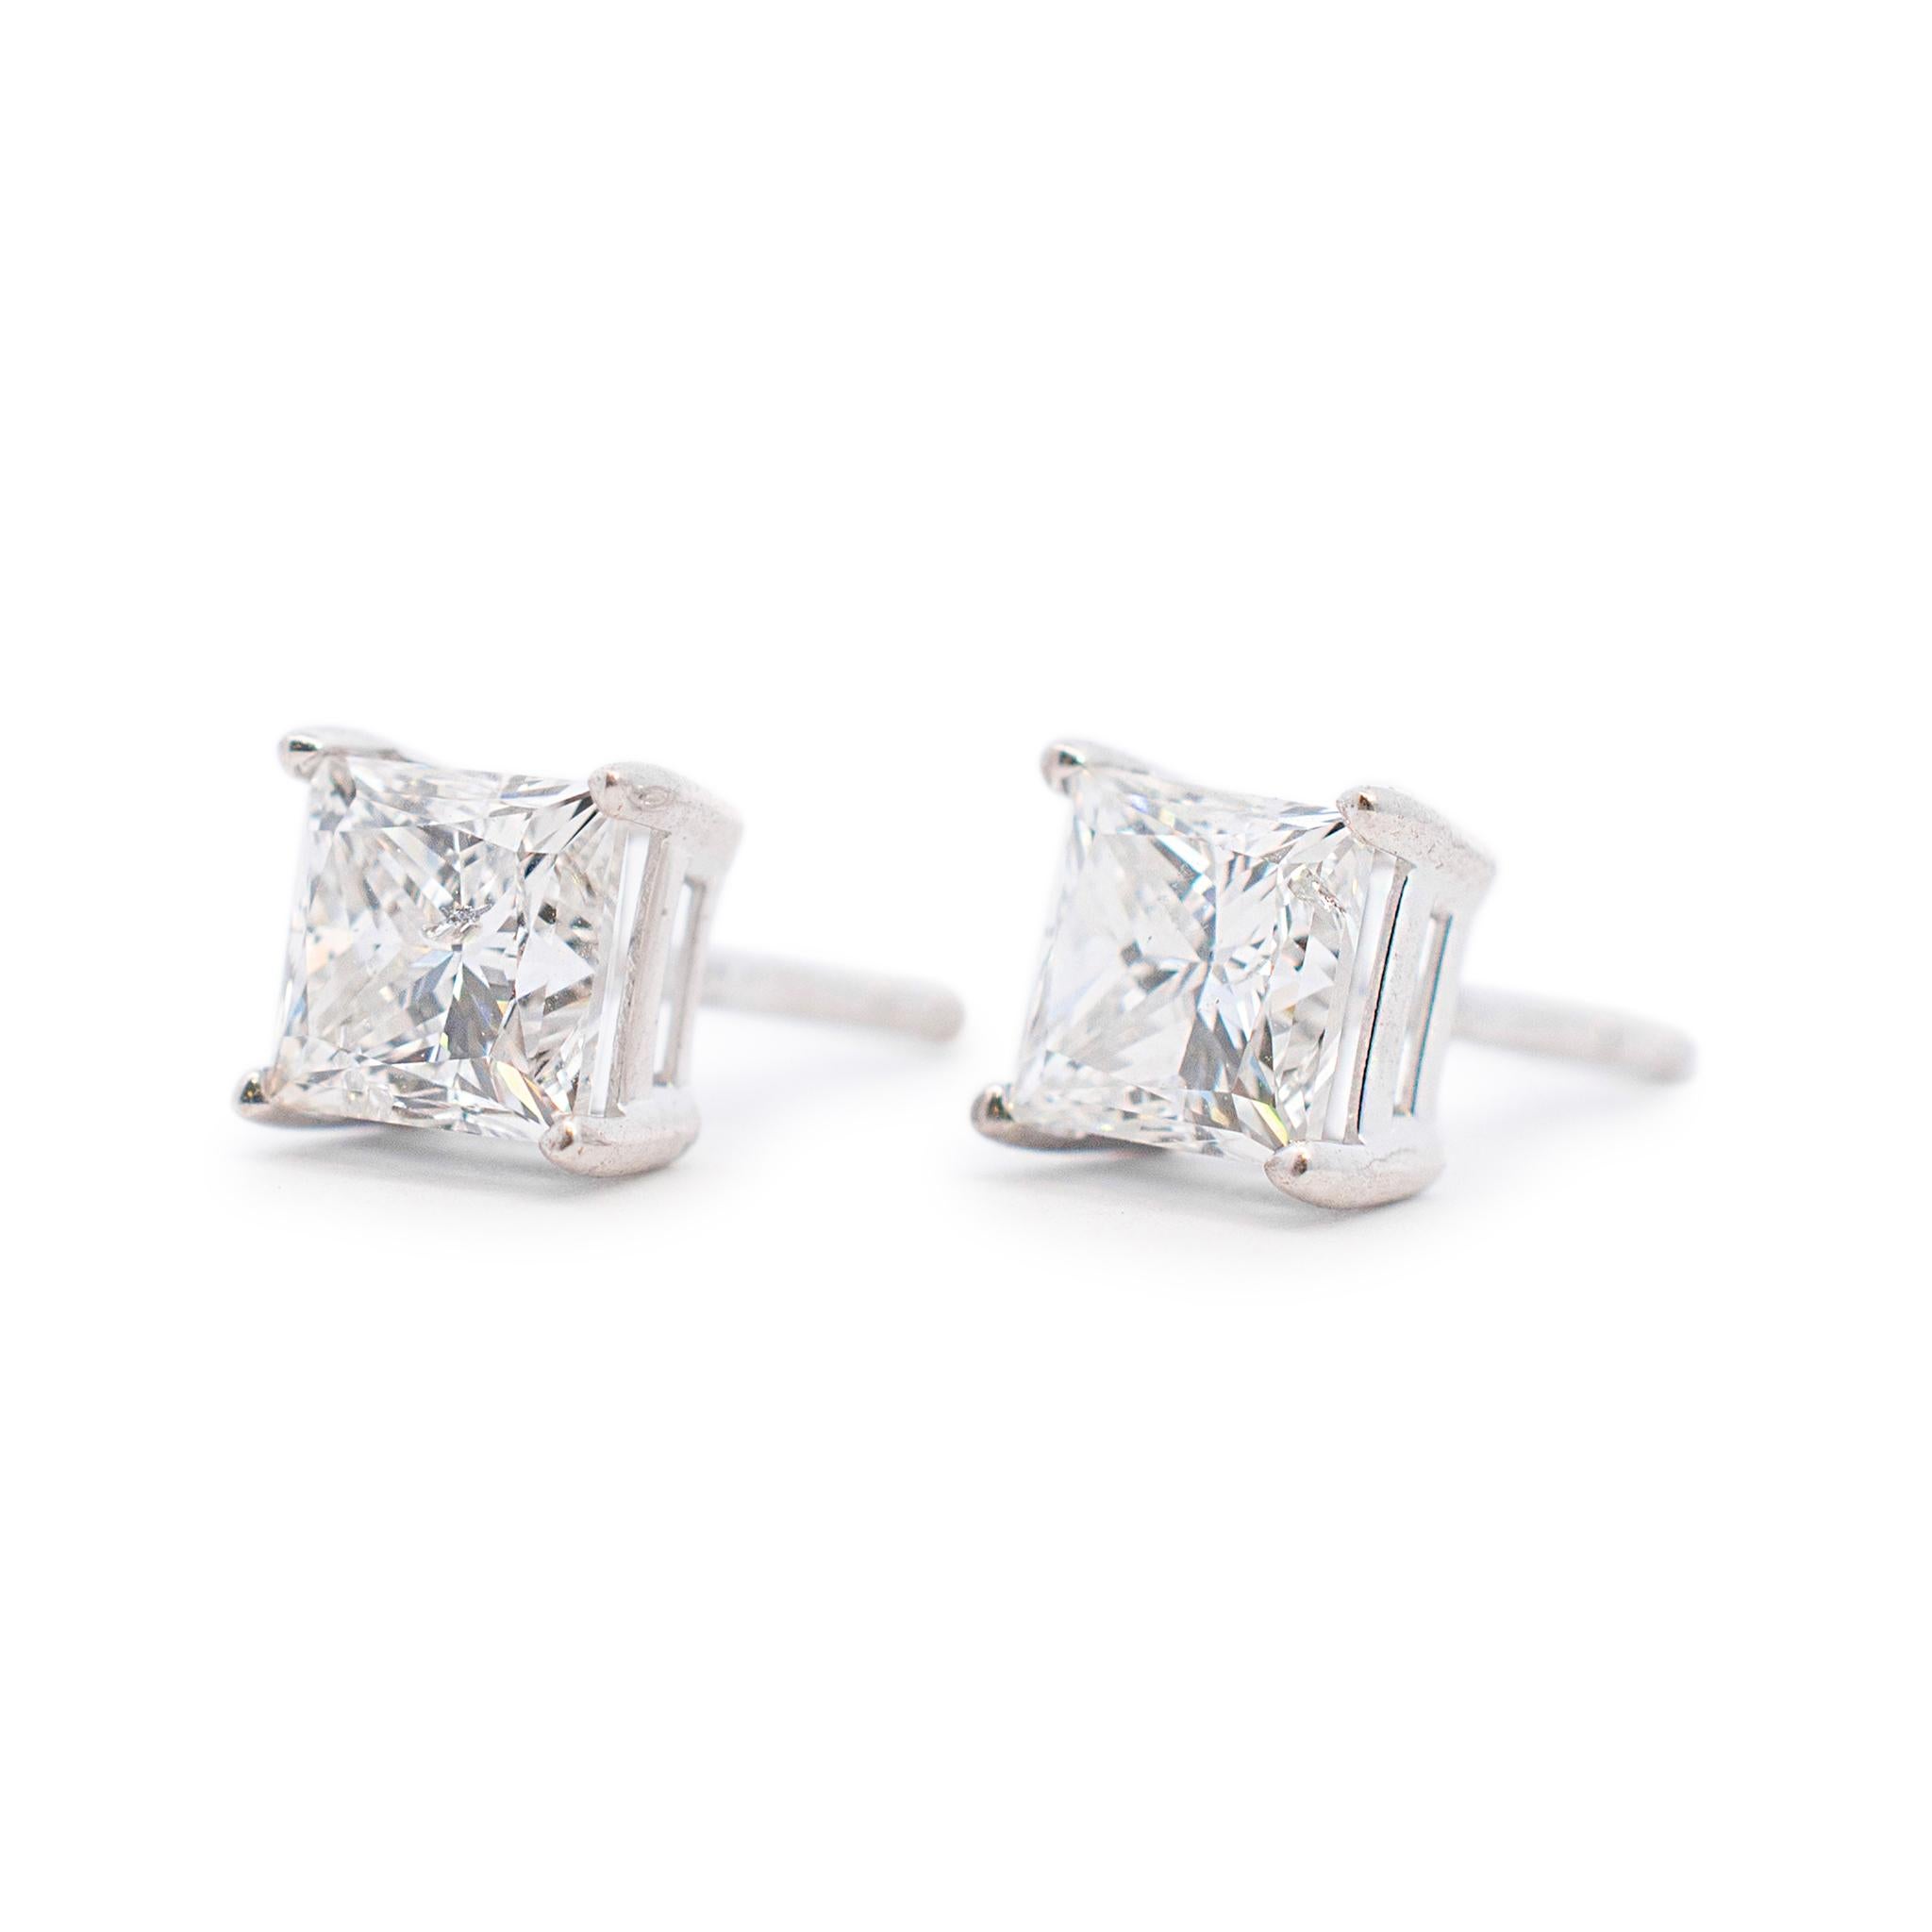 Gender: Ladies

Metal Type: 18K White Gold 

Length: 0.25 inches

Weight: 2.36 grams

Ladies 18K white gold diamond contemporary-style stud earrings with 